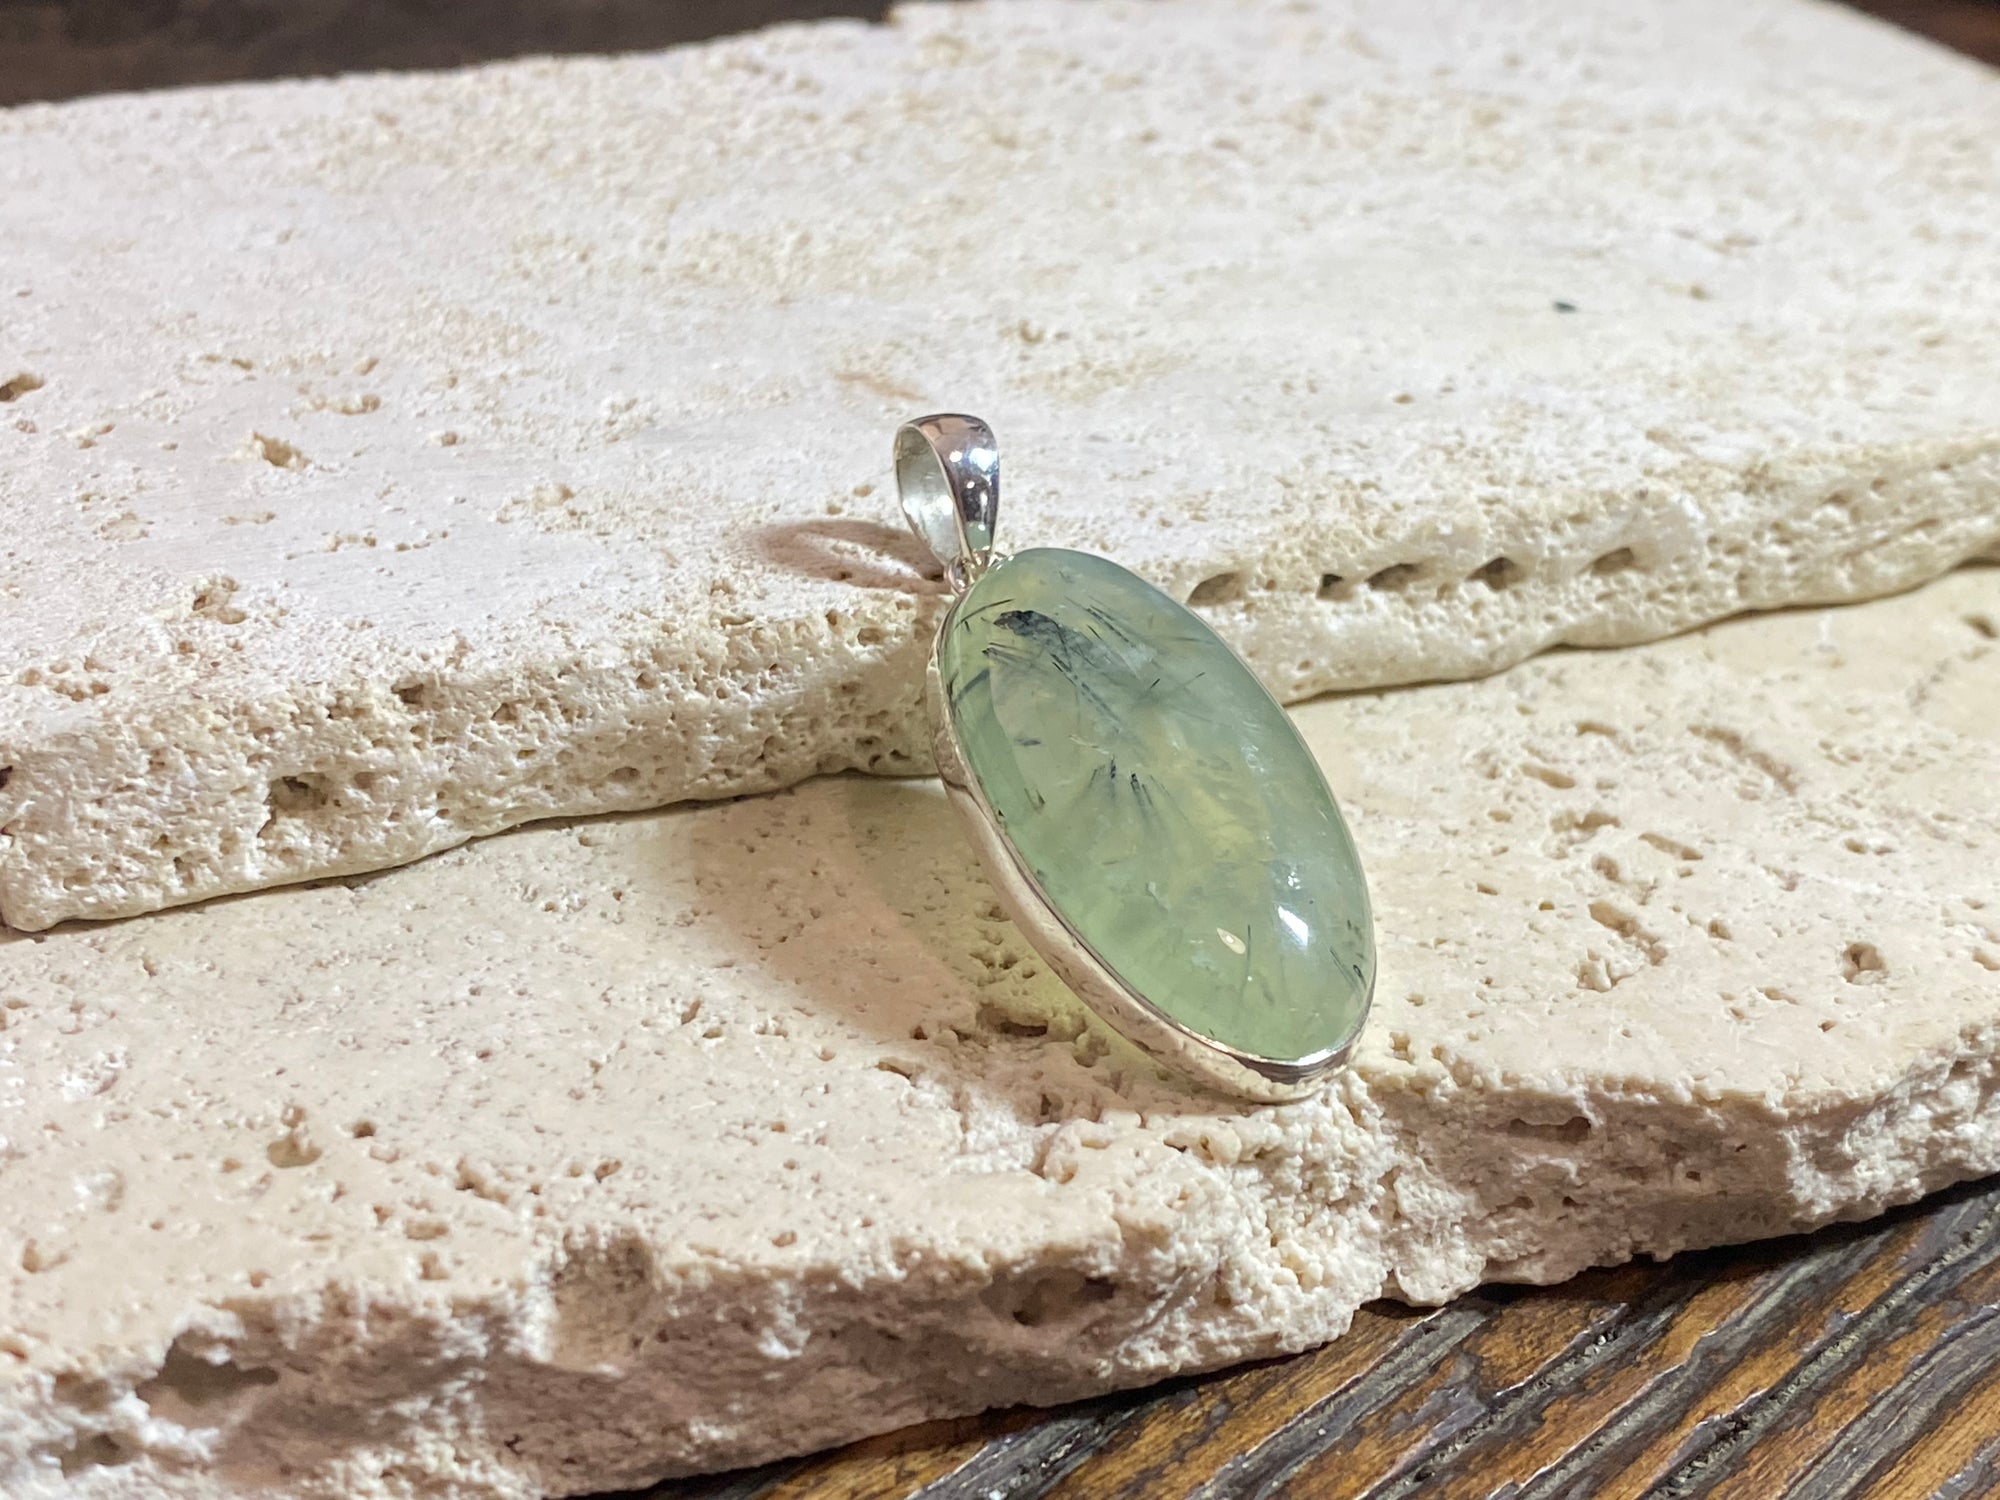 Large oval green prehnite with tourmaline inclusions set in a silver surround with a silver bail that is generous enough to take large chains or cords.